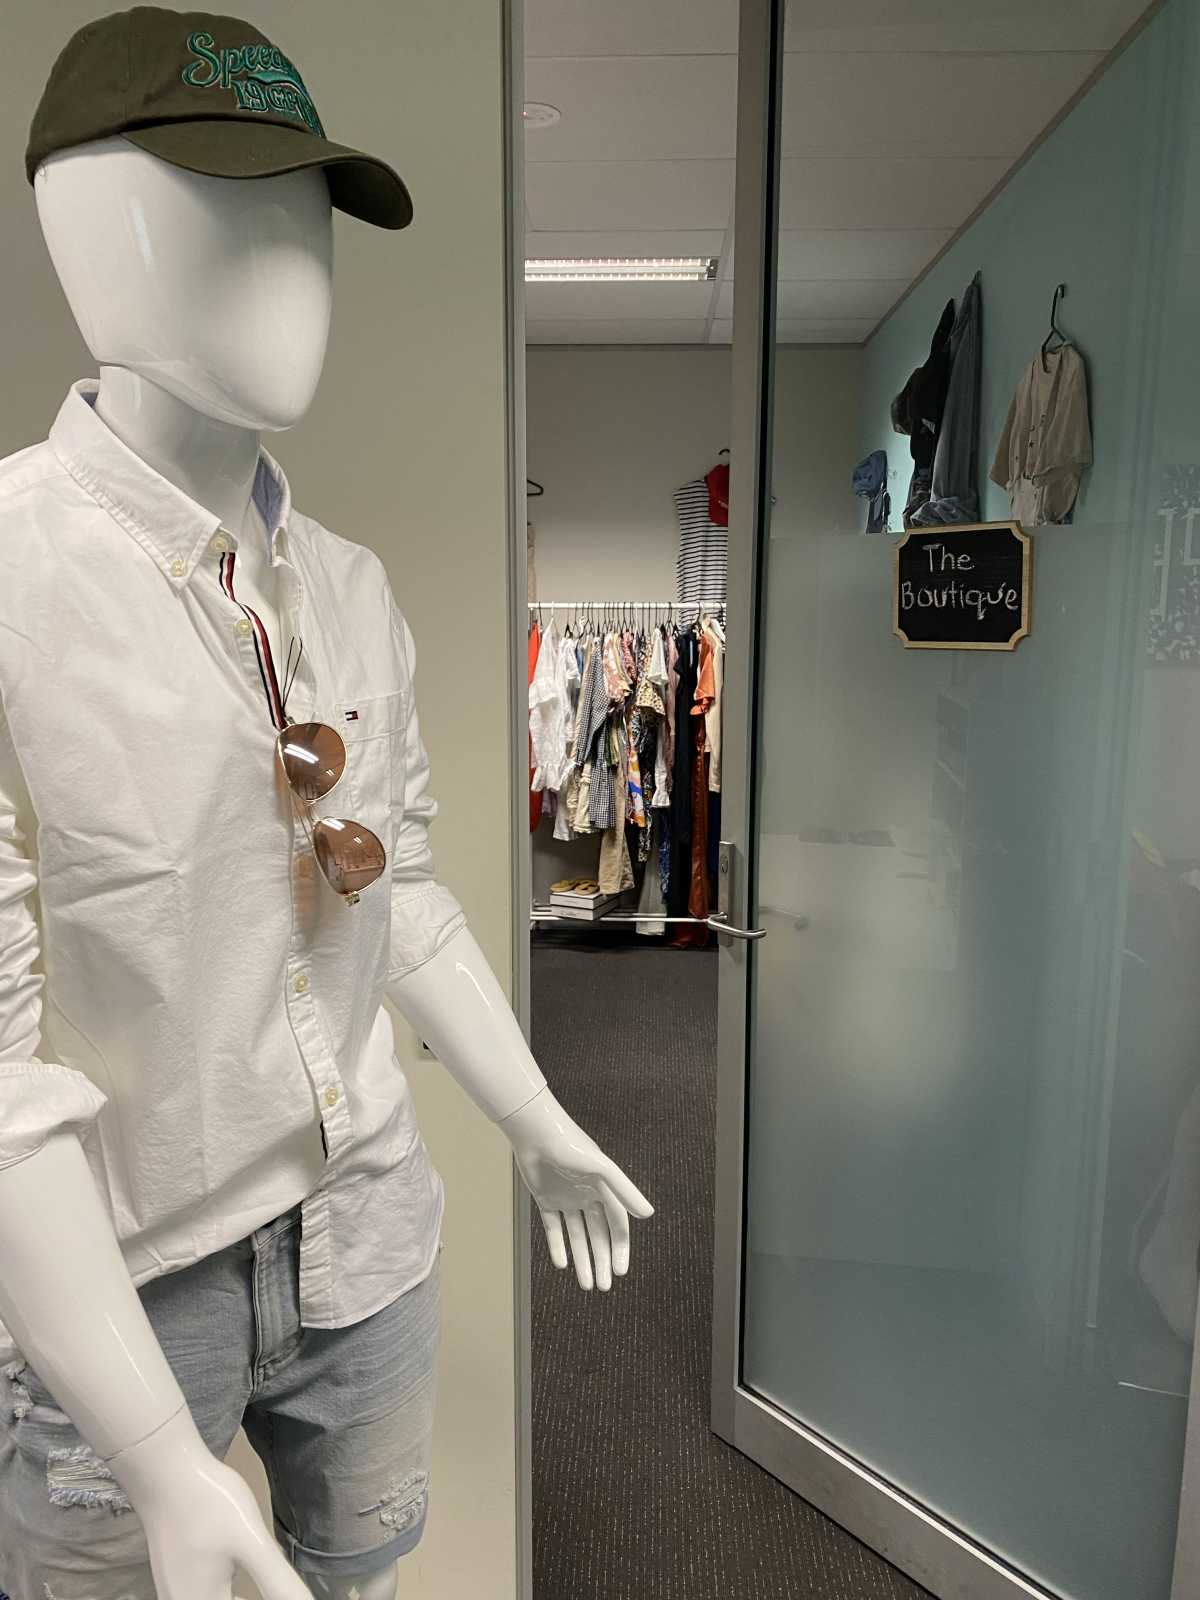 A mannequin wearing a cap, white shirt and denim shorts next to a door with a sign that reads 'The Boutique'.